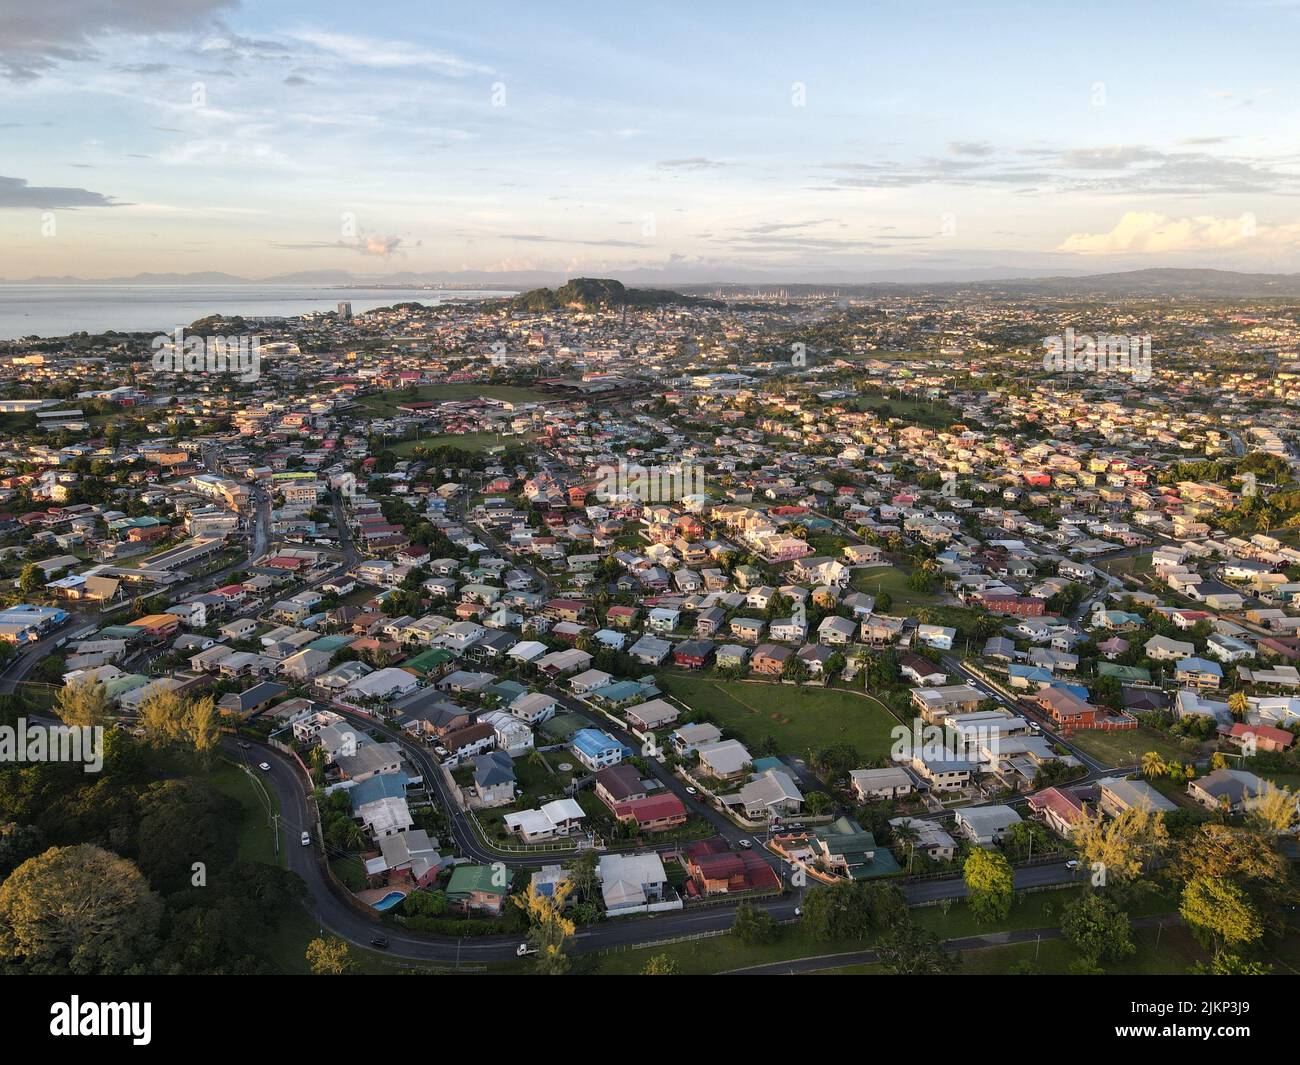 An aerial view of San Fernando city against the dusk sky at sunset in Trinidad and Tobago Stock Photo